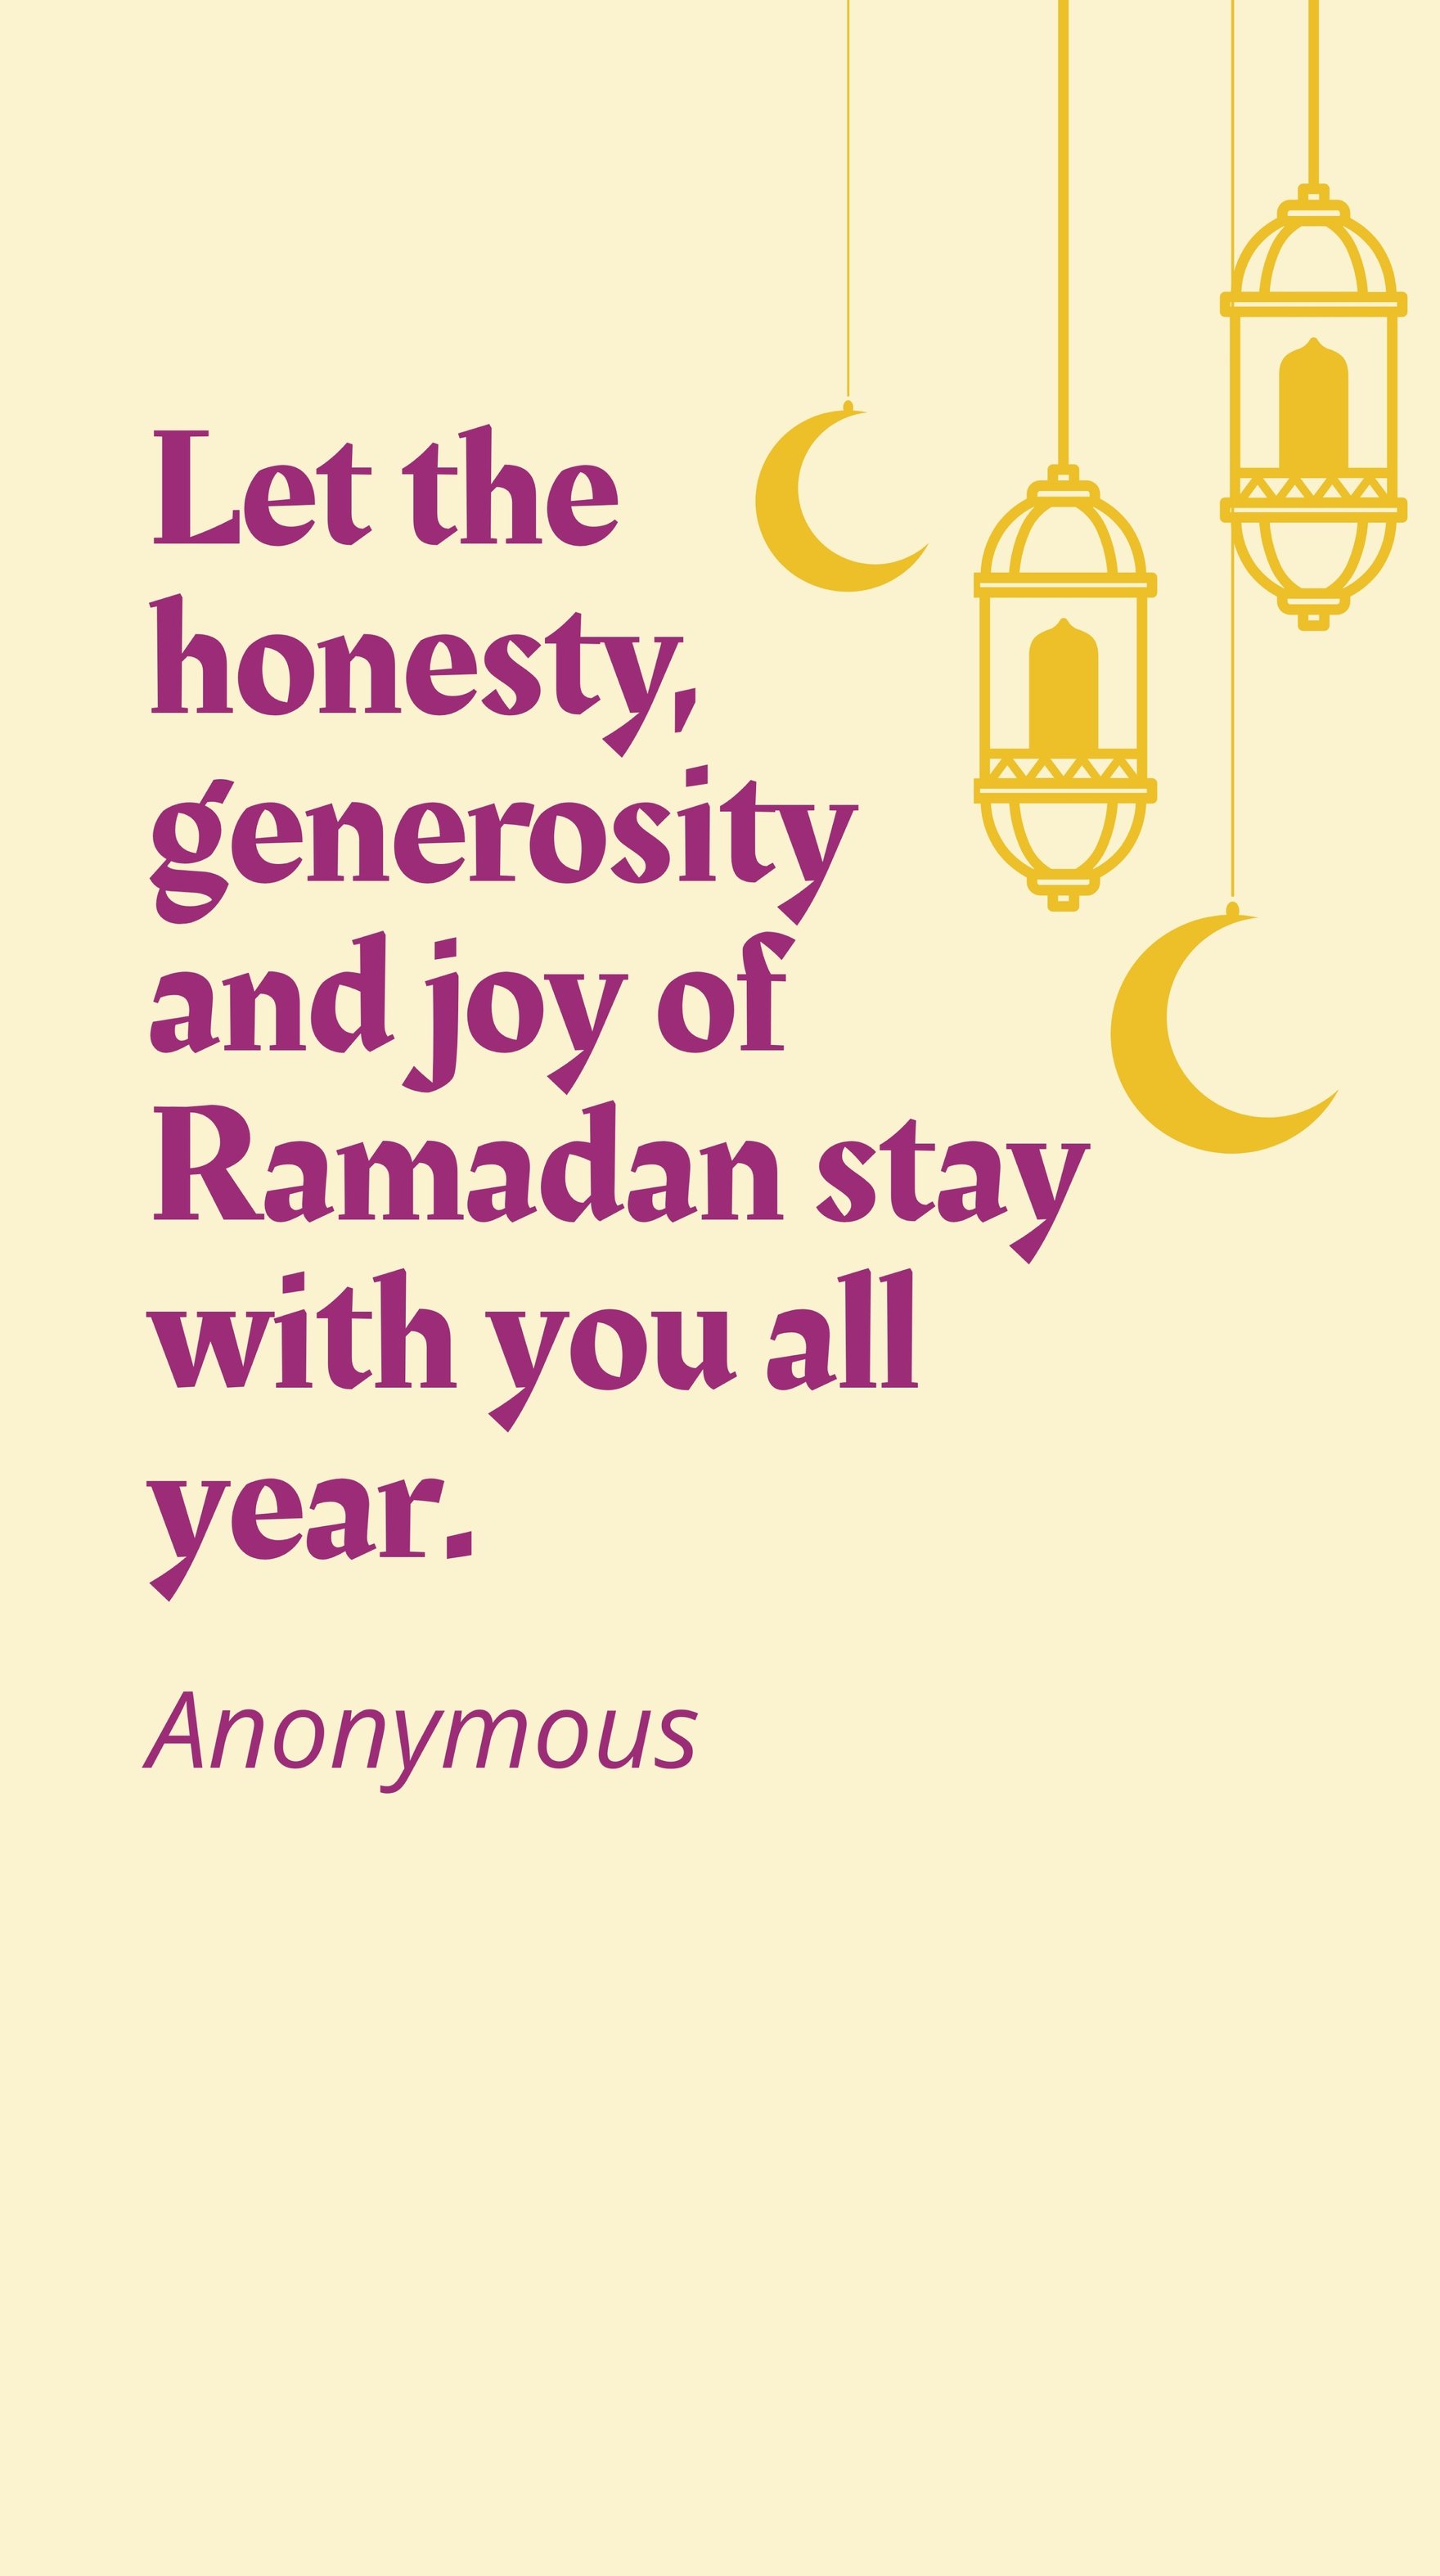 Anonymous - Let the honesty, generosity and joy of Ramadan stay with you all year.